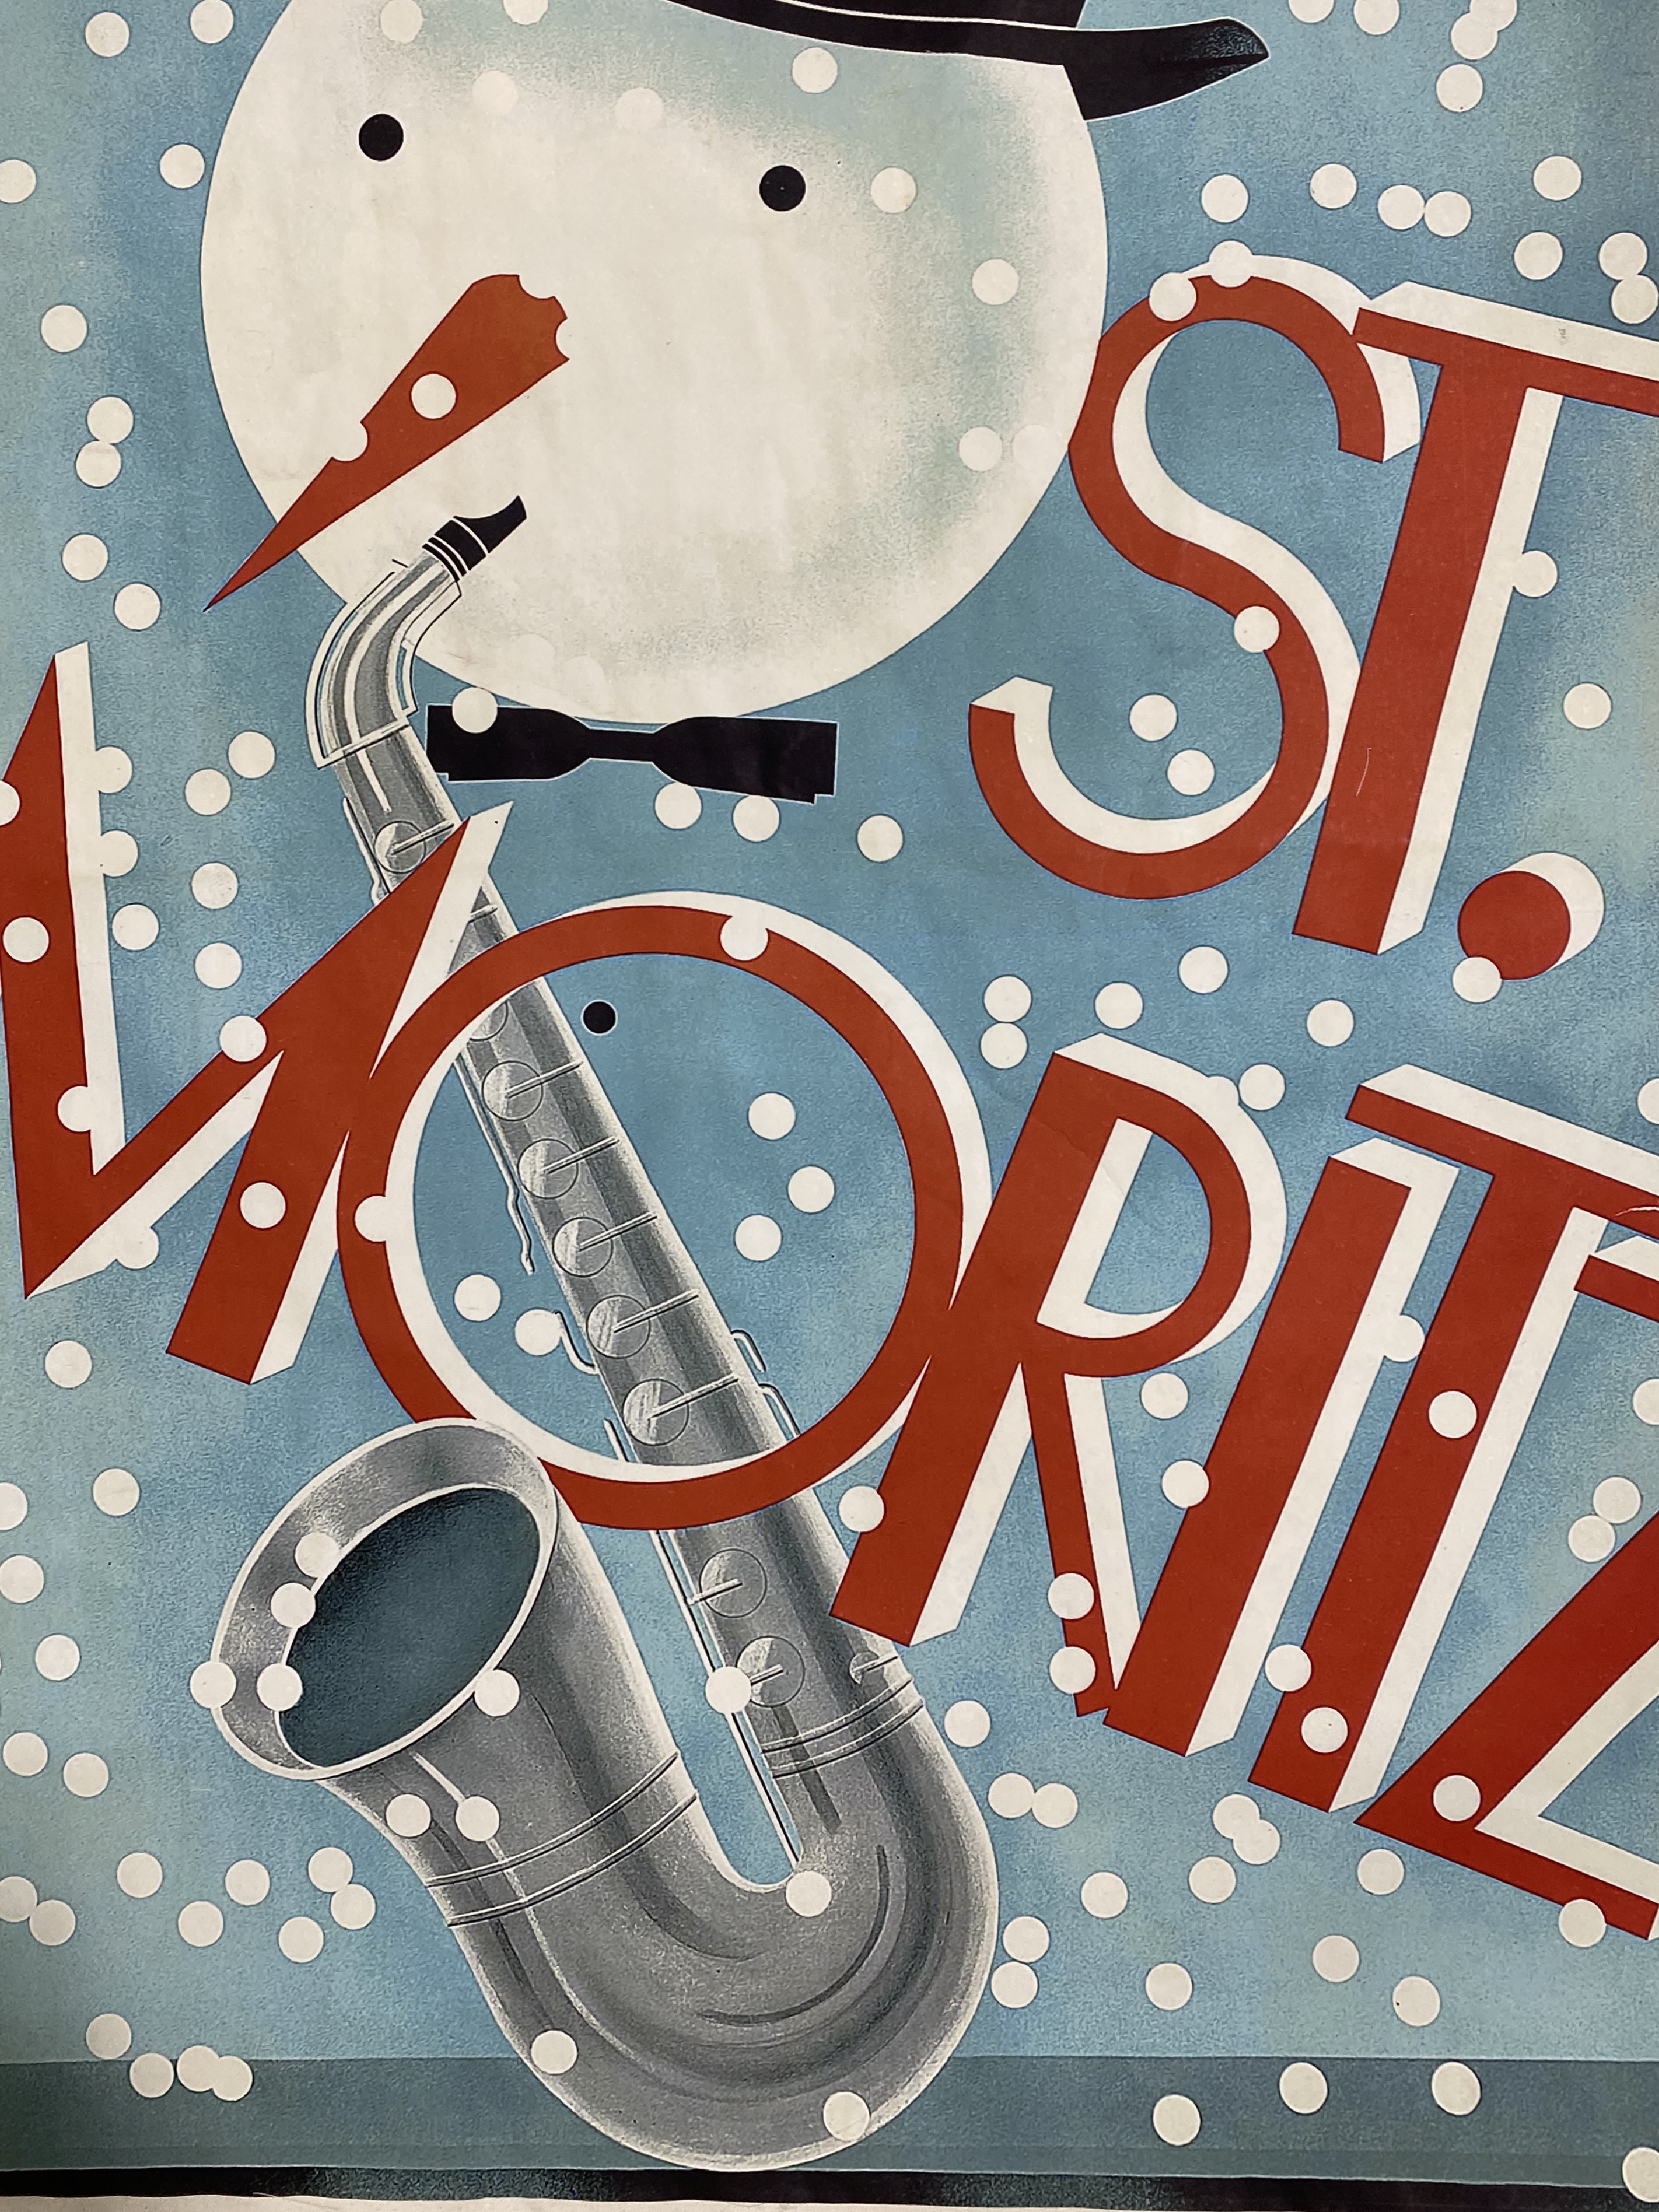 St. Moritz - Swiss Poster, Backed to Linen - Image 12 of 22